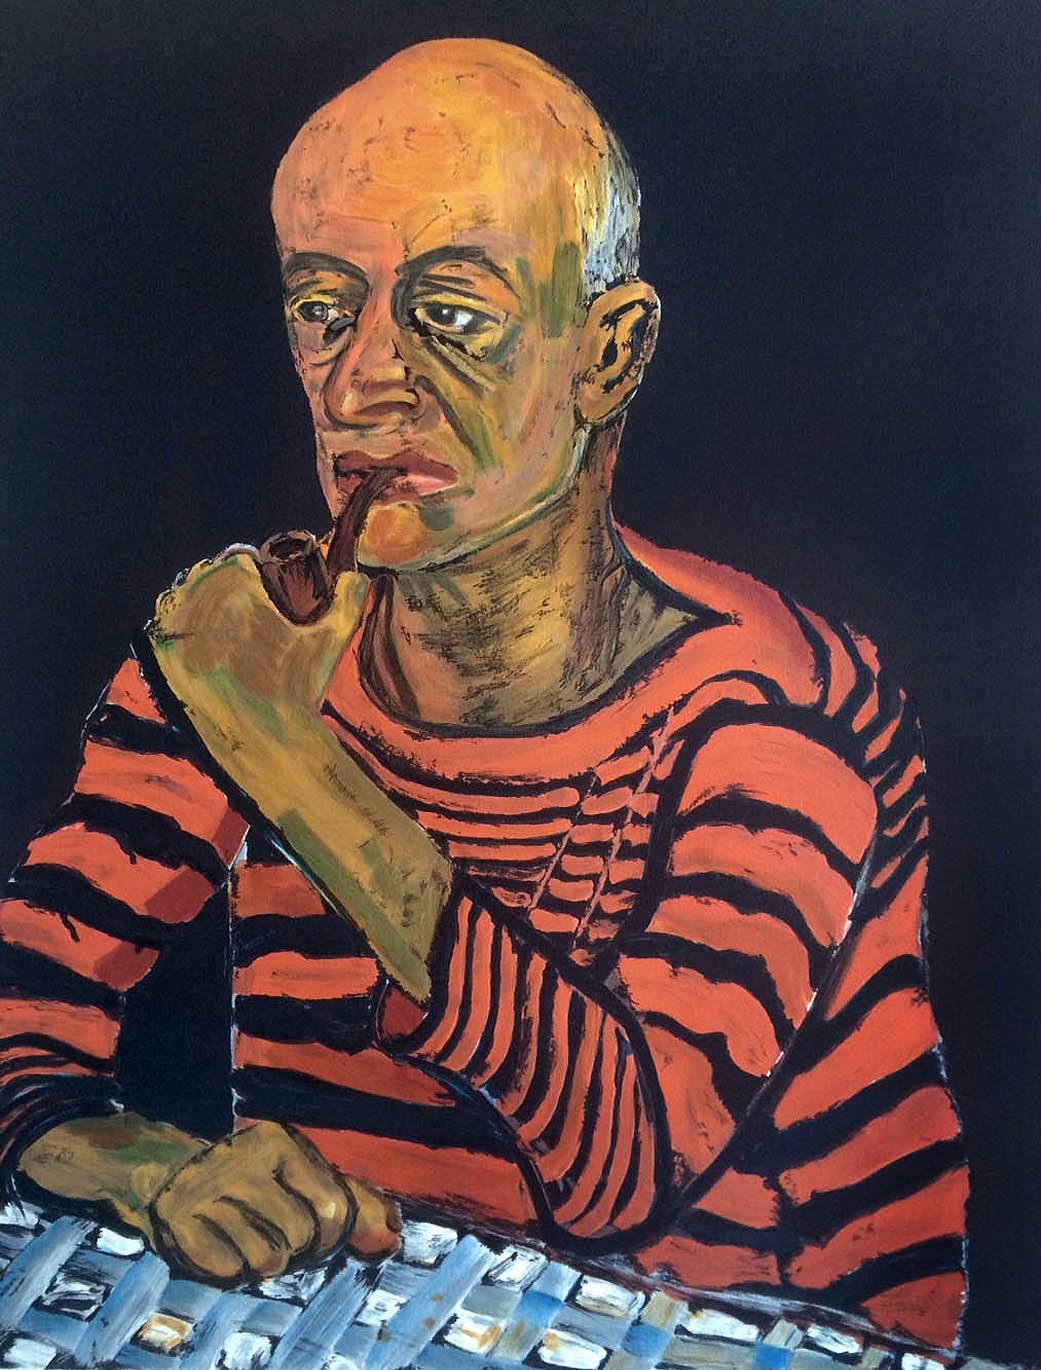 PORTRAIT OF JOHN ROTHSCHILD Signed Lithograph Seated Man with Pipe, Sailor Shirt - Print by Alice Neel